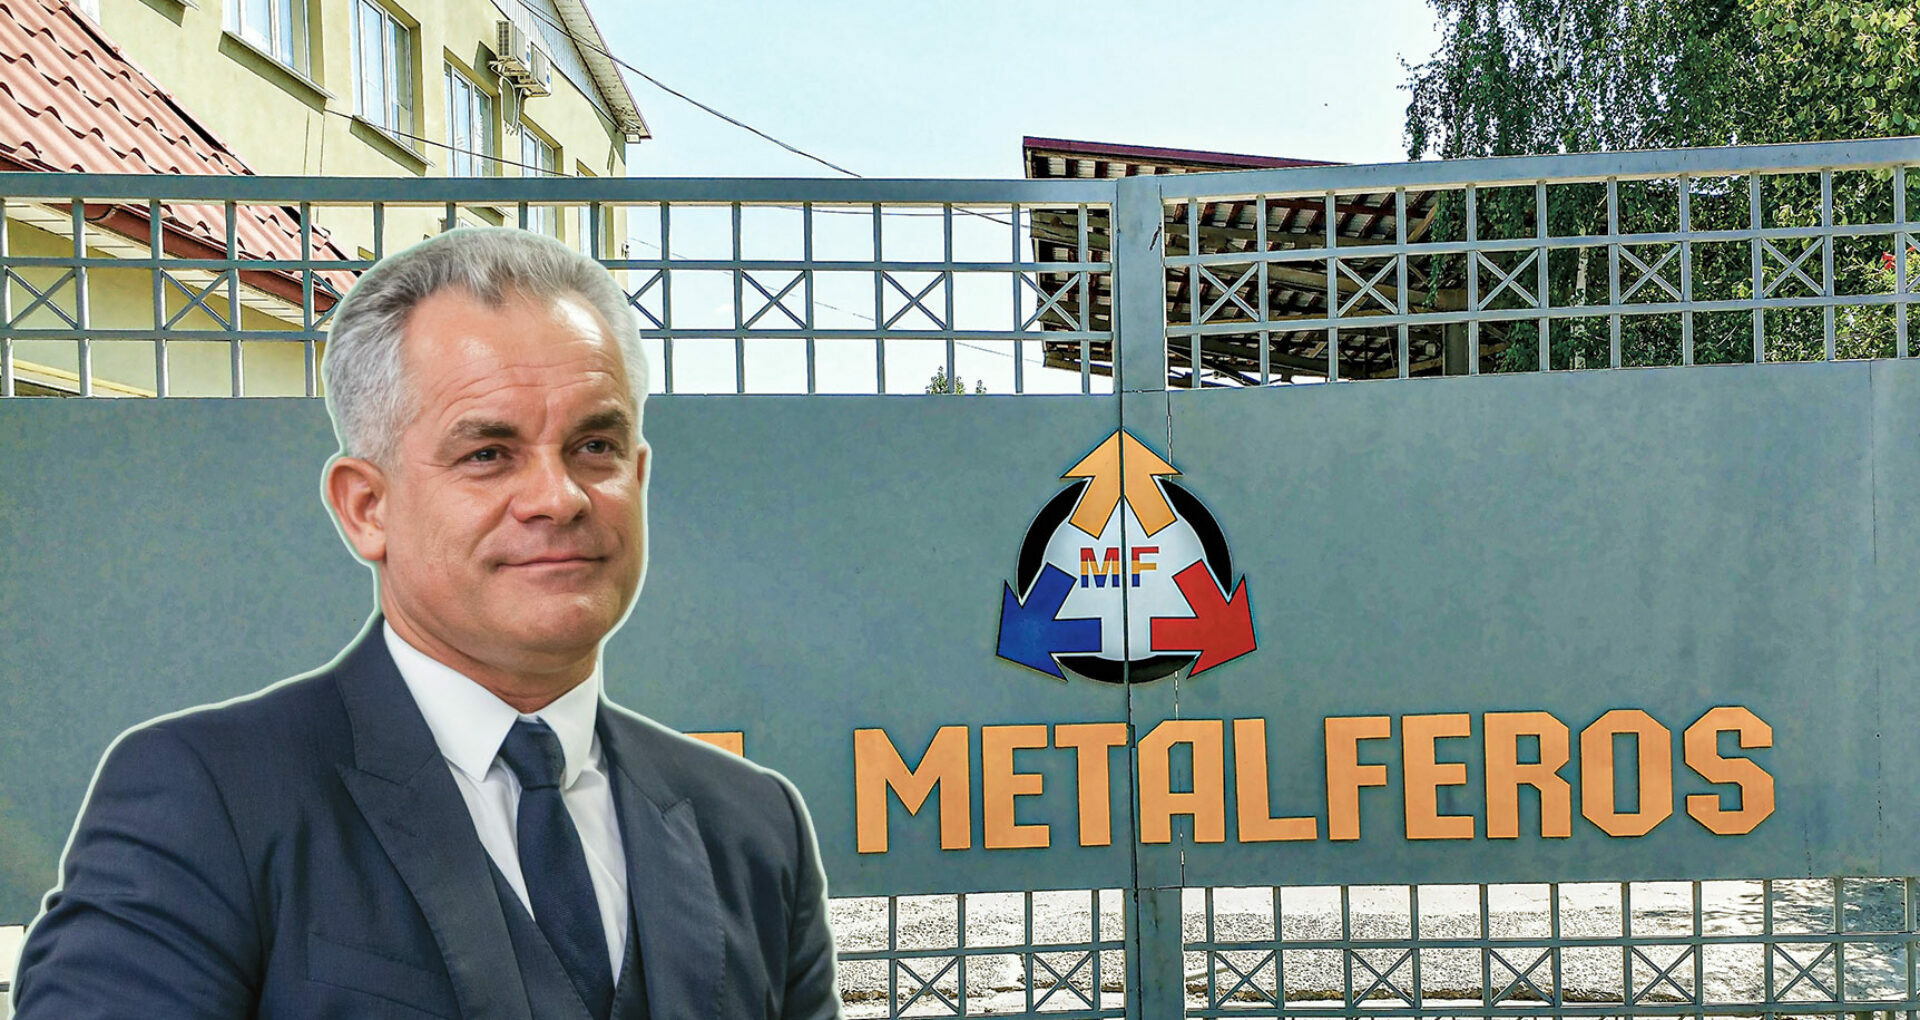 The Runaway Oligarch Vladimir Plahotniuc has been Charged with Creating and Running a Criminal Organization, Money Laundering, and Large-scale Fraud in the Metalferos Criminal Case